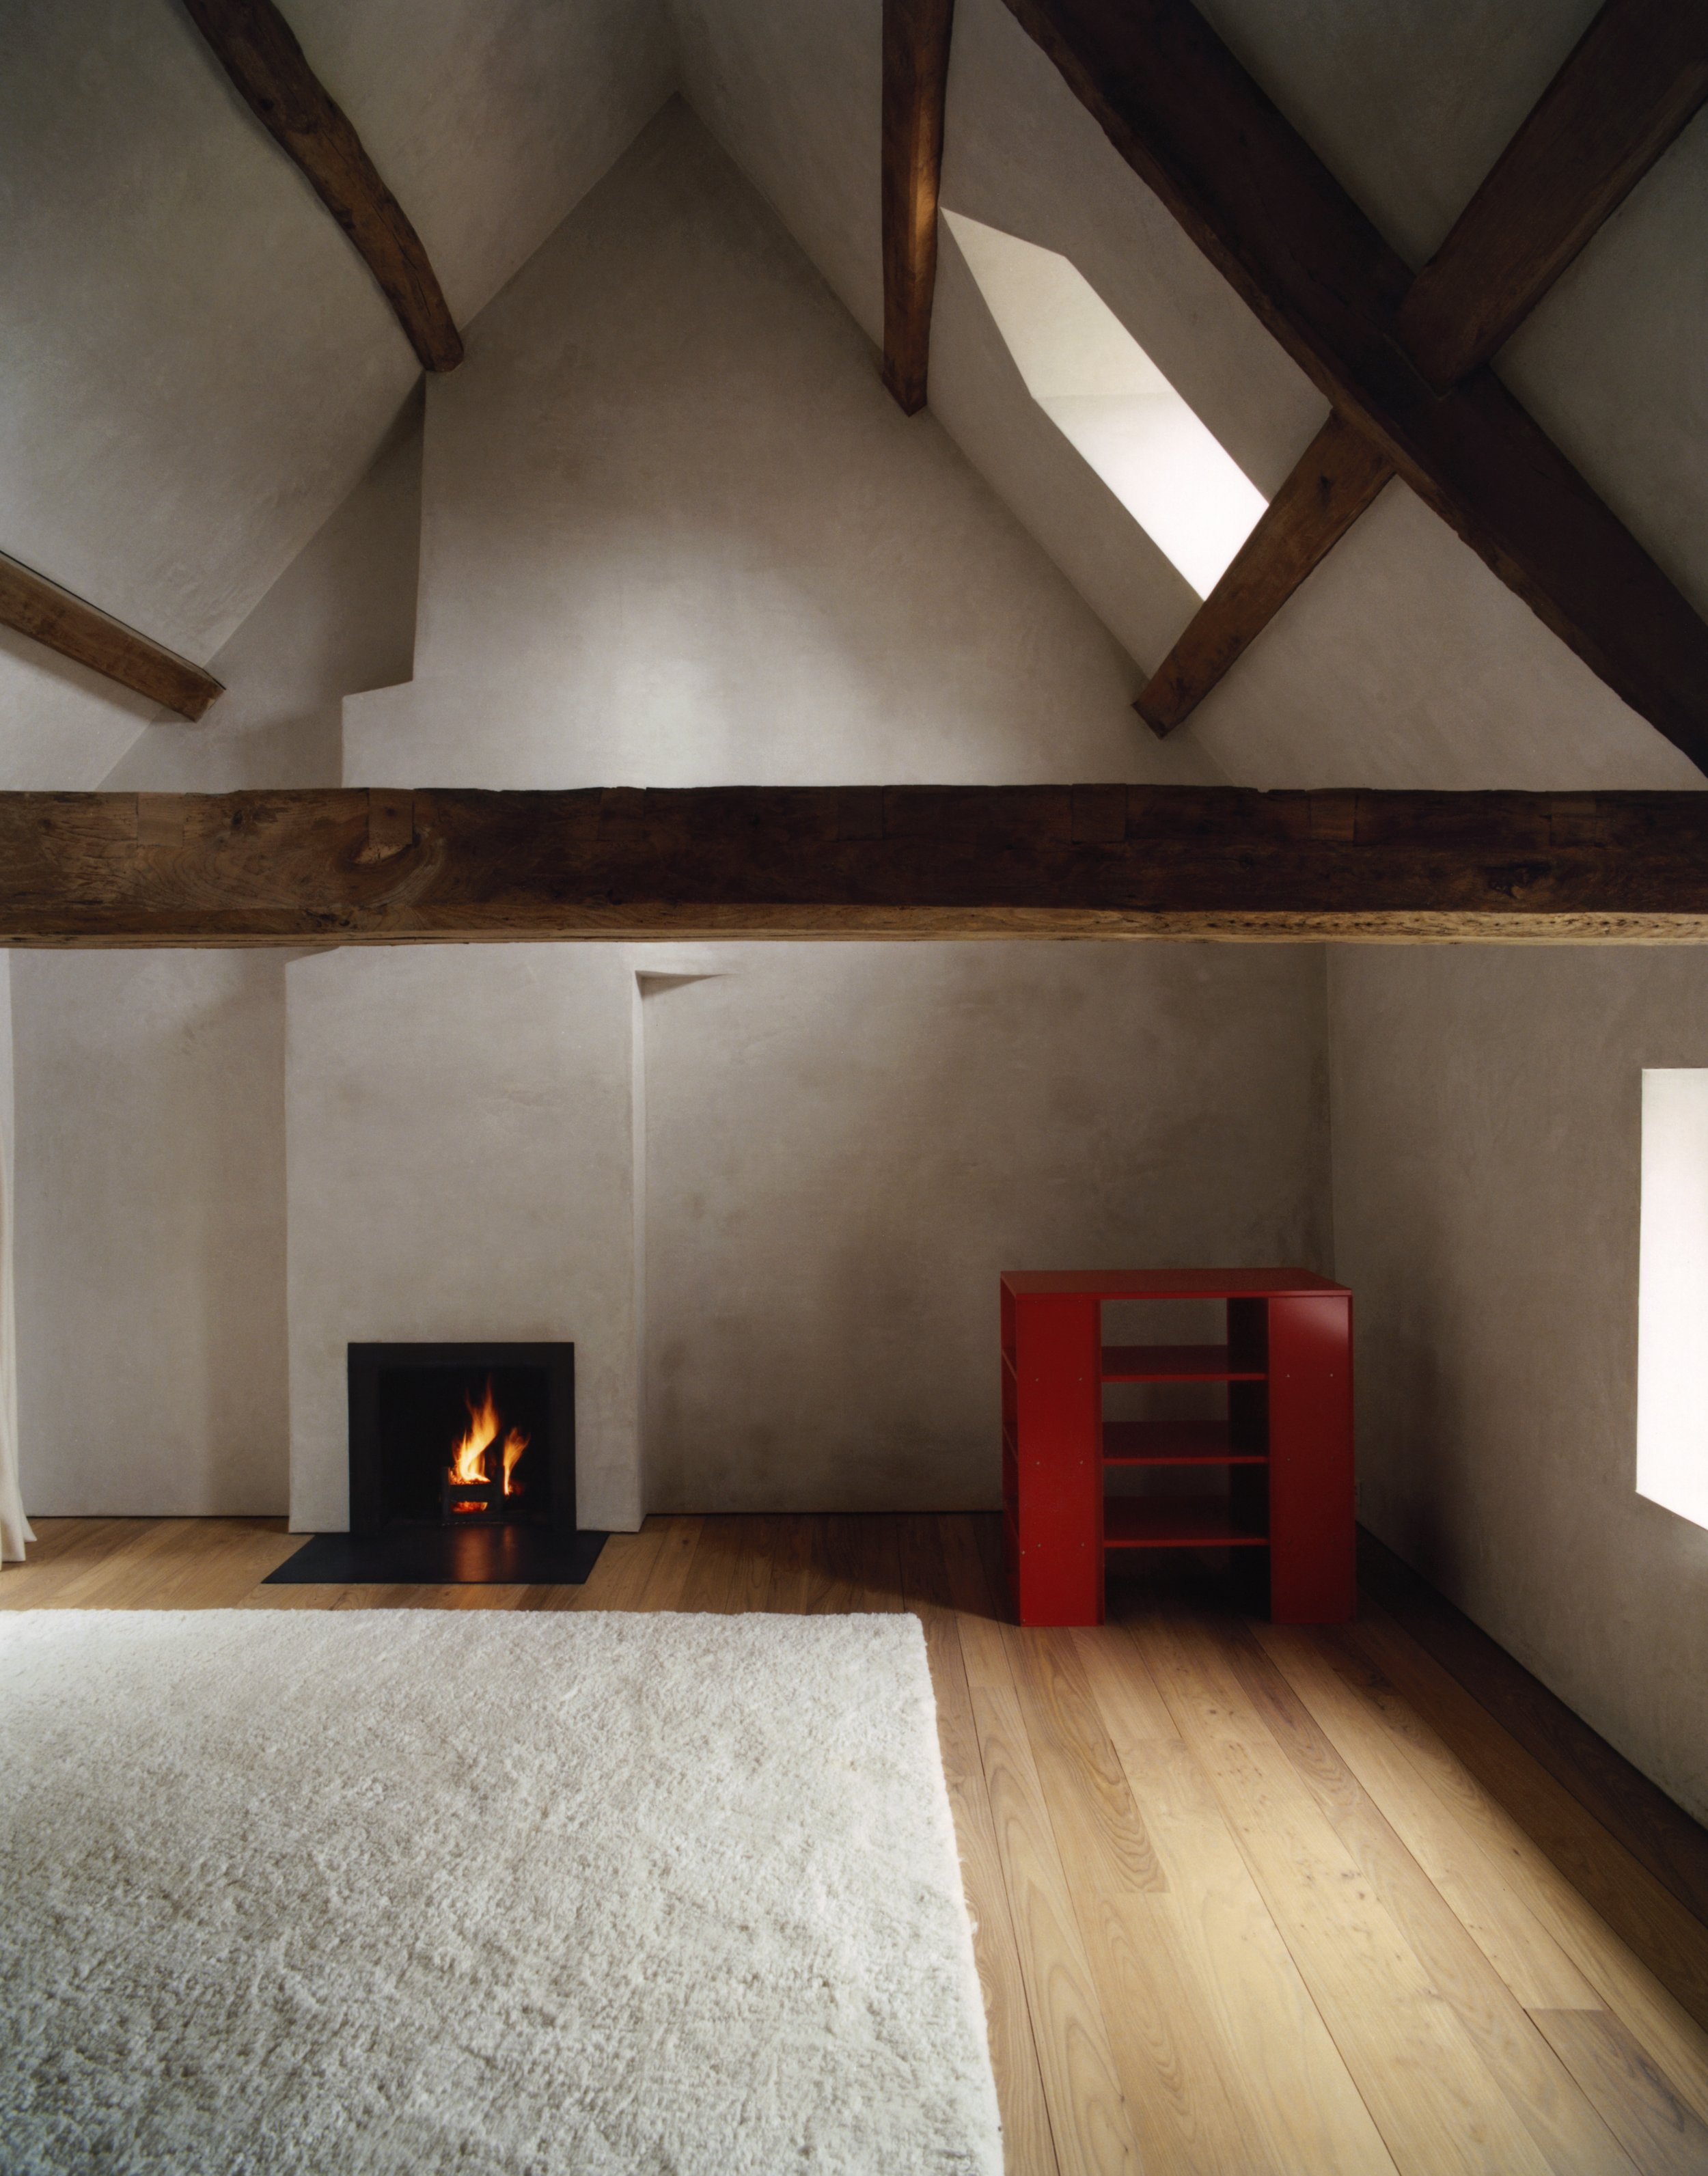  The homes of architect John Pawson. The Cotswolds and Notting Hill, London. An ongoing personal body of work.   